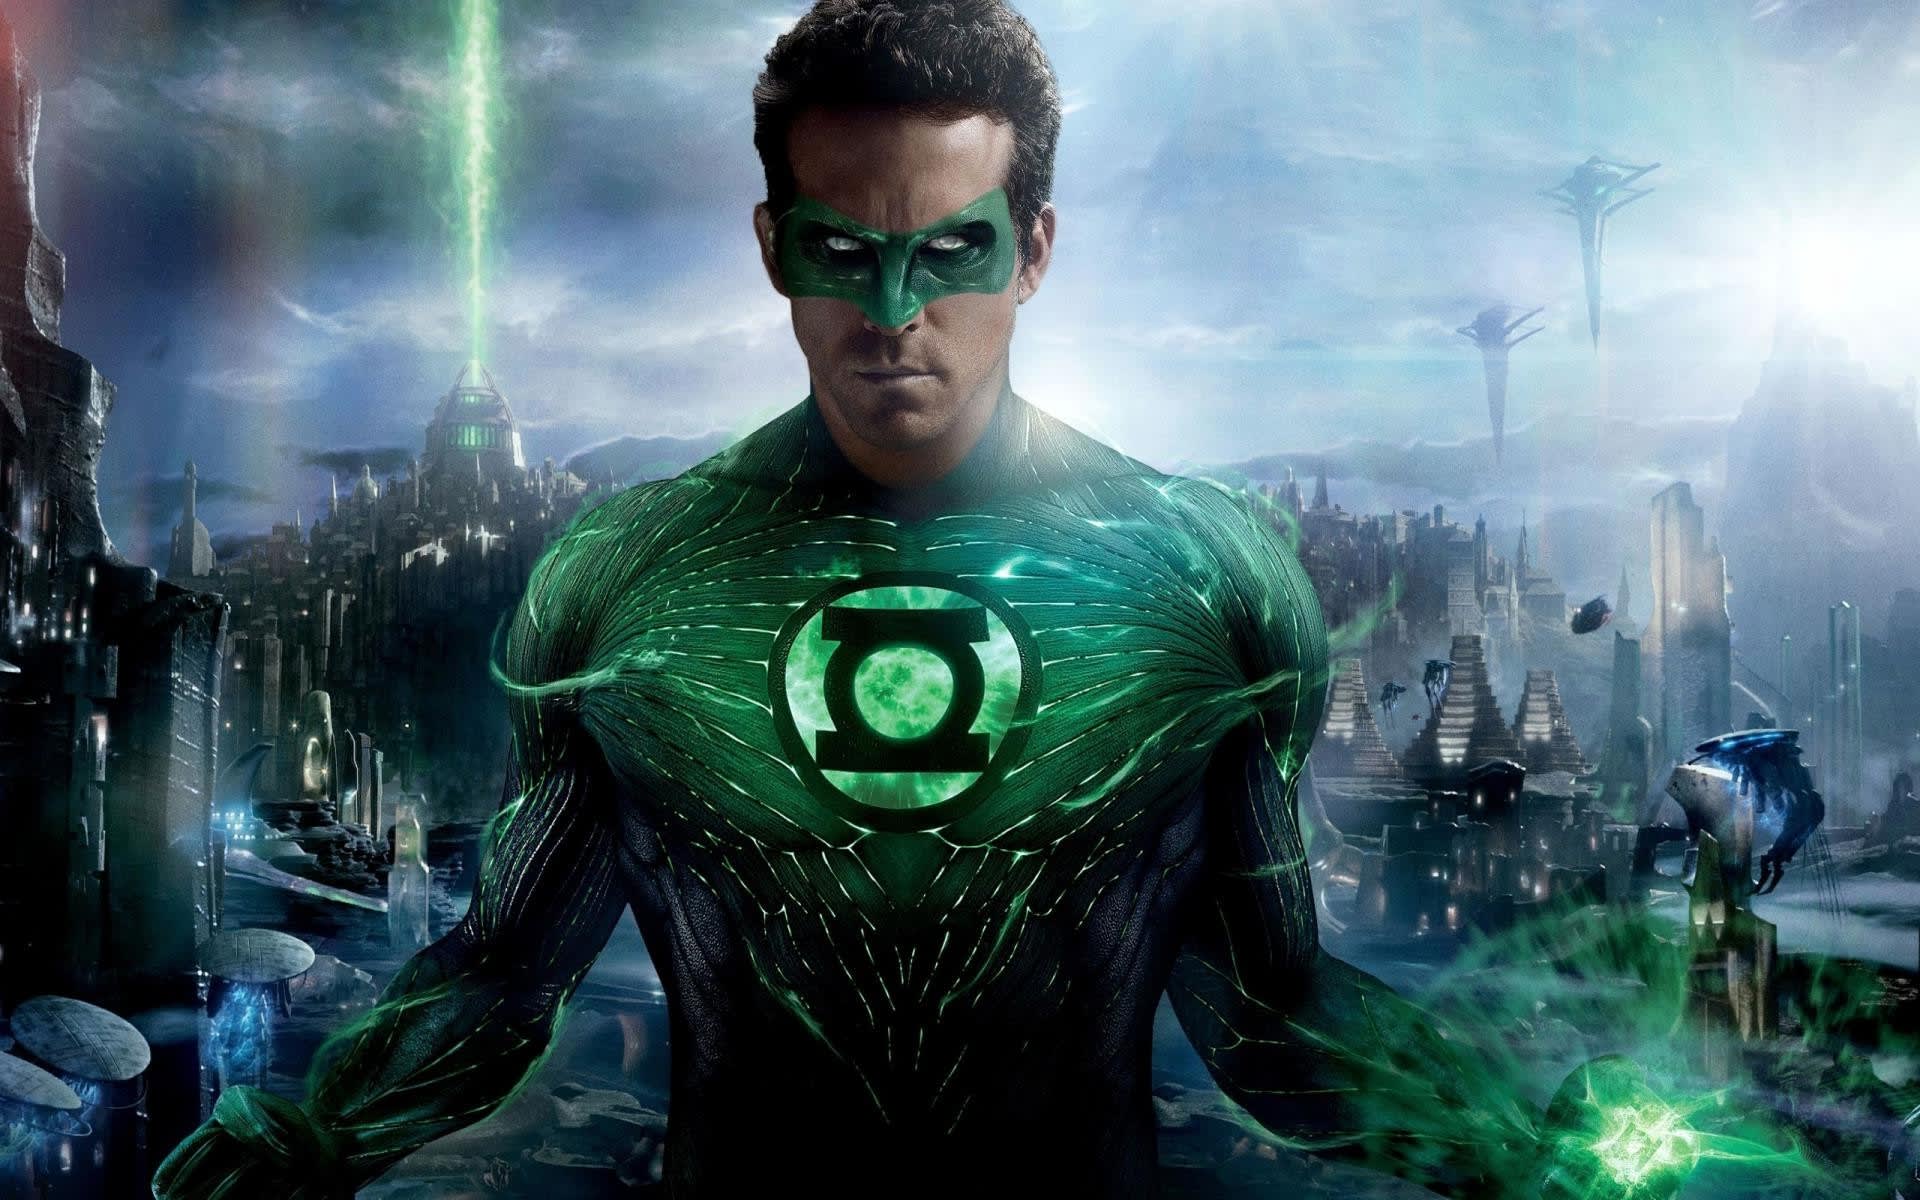 Actors Who Could Play Green Lantern in 'Justice League'